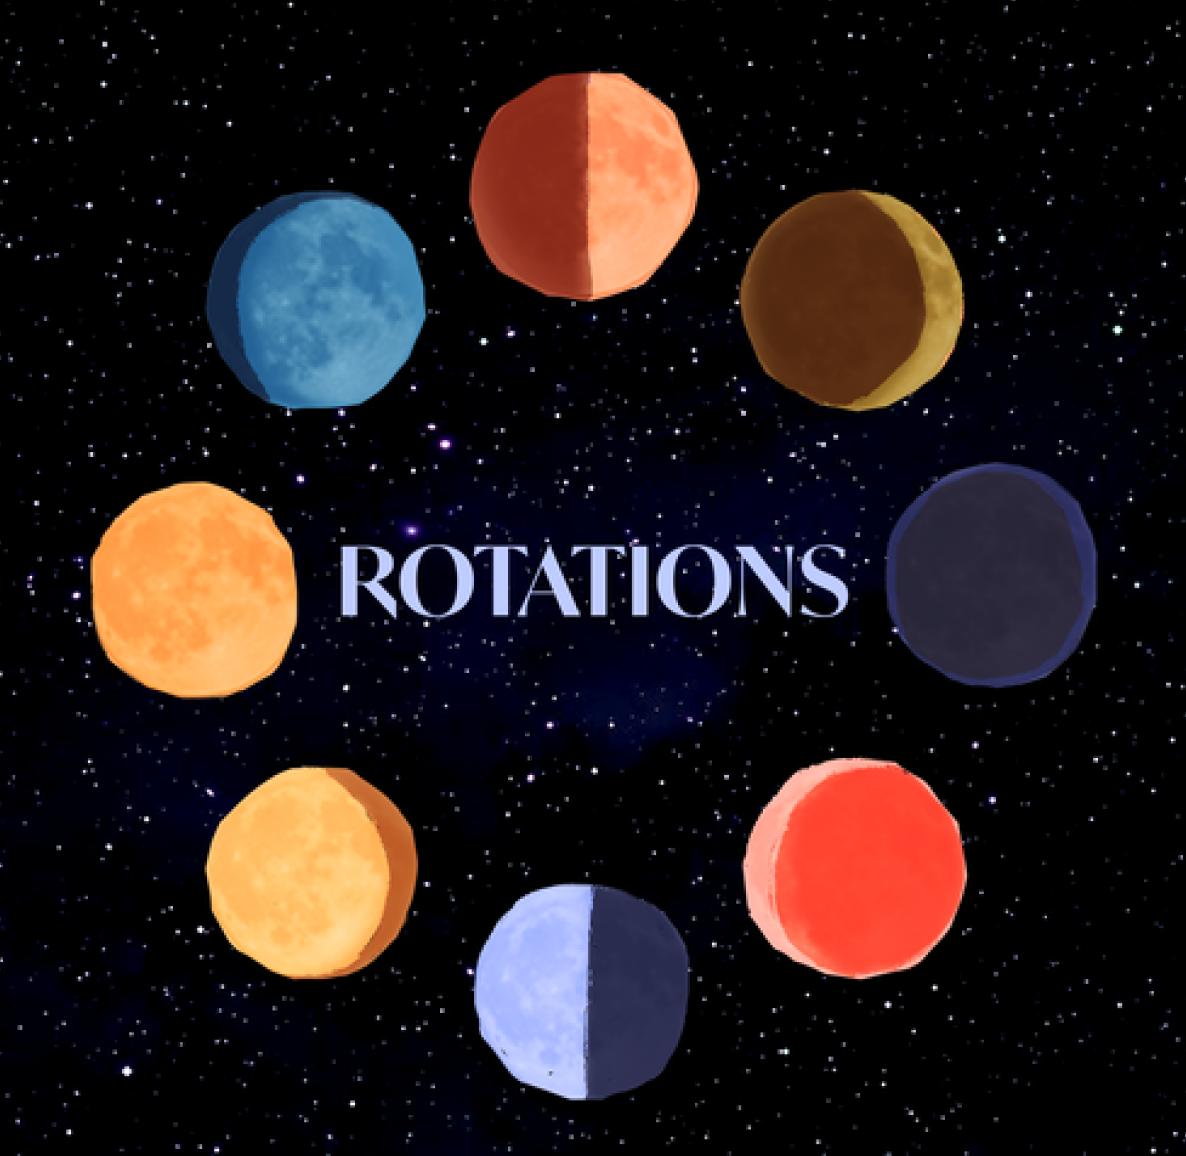 A poster for Rotations Webinar Series, eight drawn planets circling around the word "Rotations" in space.